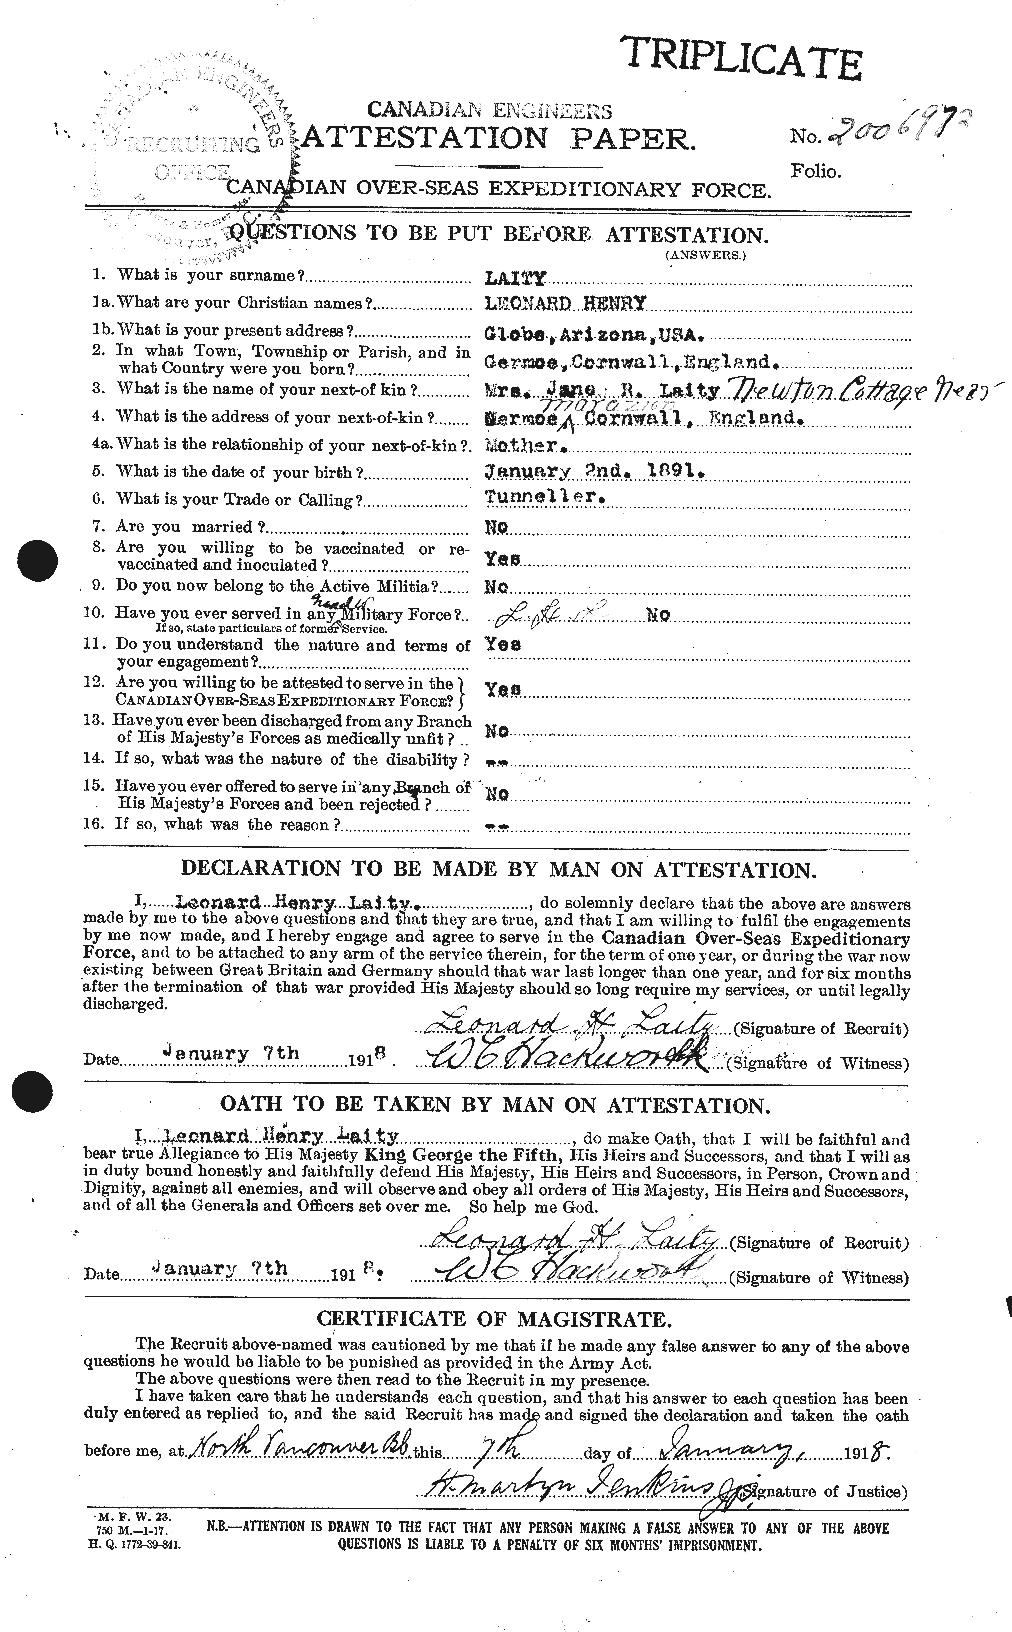 Personnel Records of the First World War - CEF 448942a